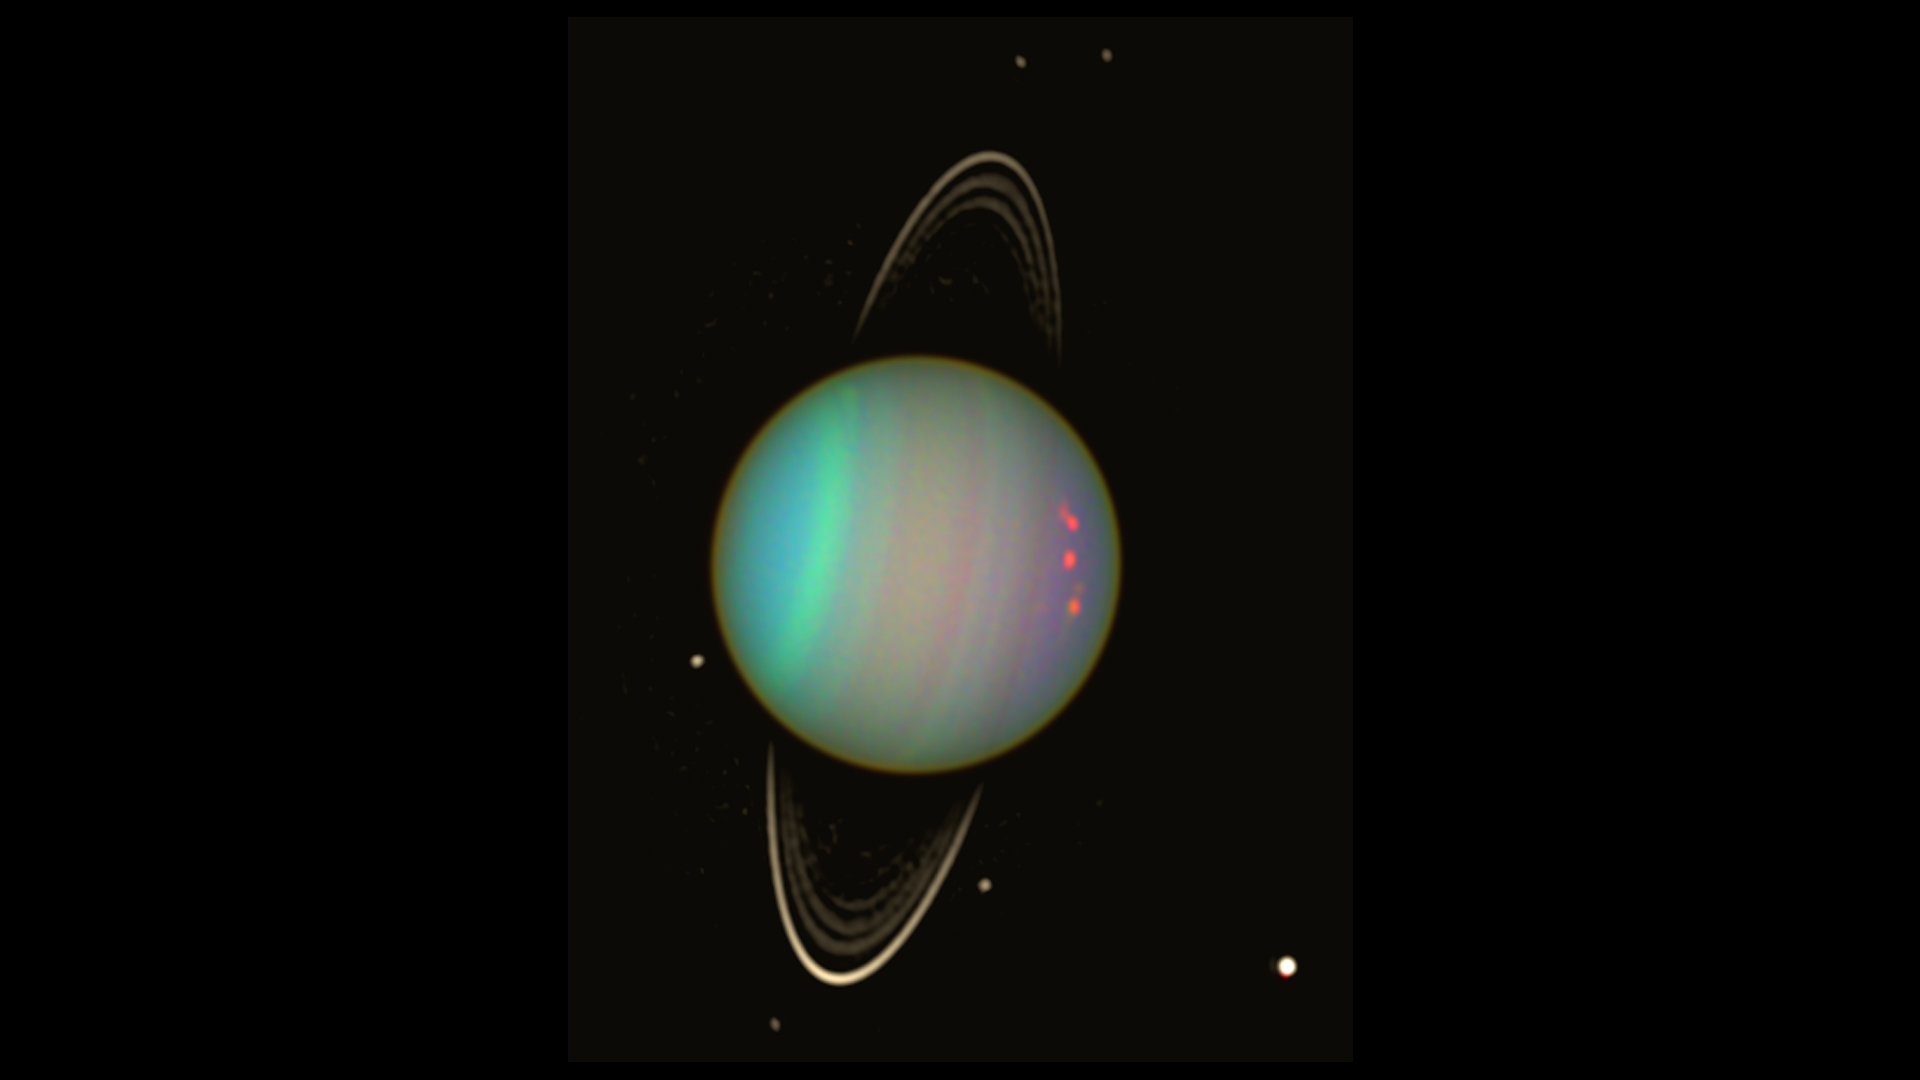 Uranus is seen in this false-color view from NASA's Hubble Space Telescope from August 2003. The brightness of the planet's faint rings and dark moons has been enhanced for visibility. Image credit: NASA/Erich Karkoschka (Univ. Arizona)